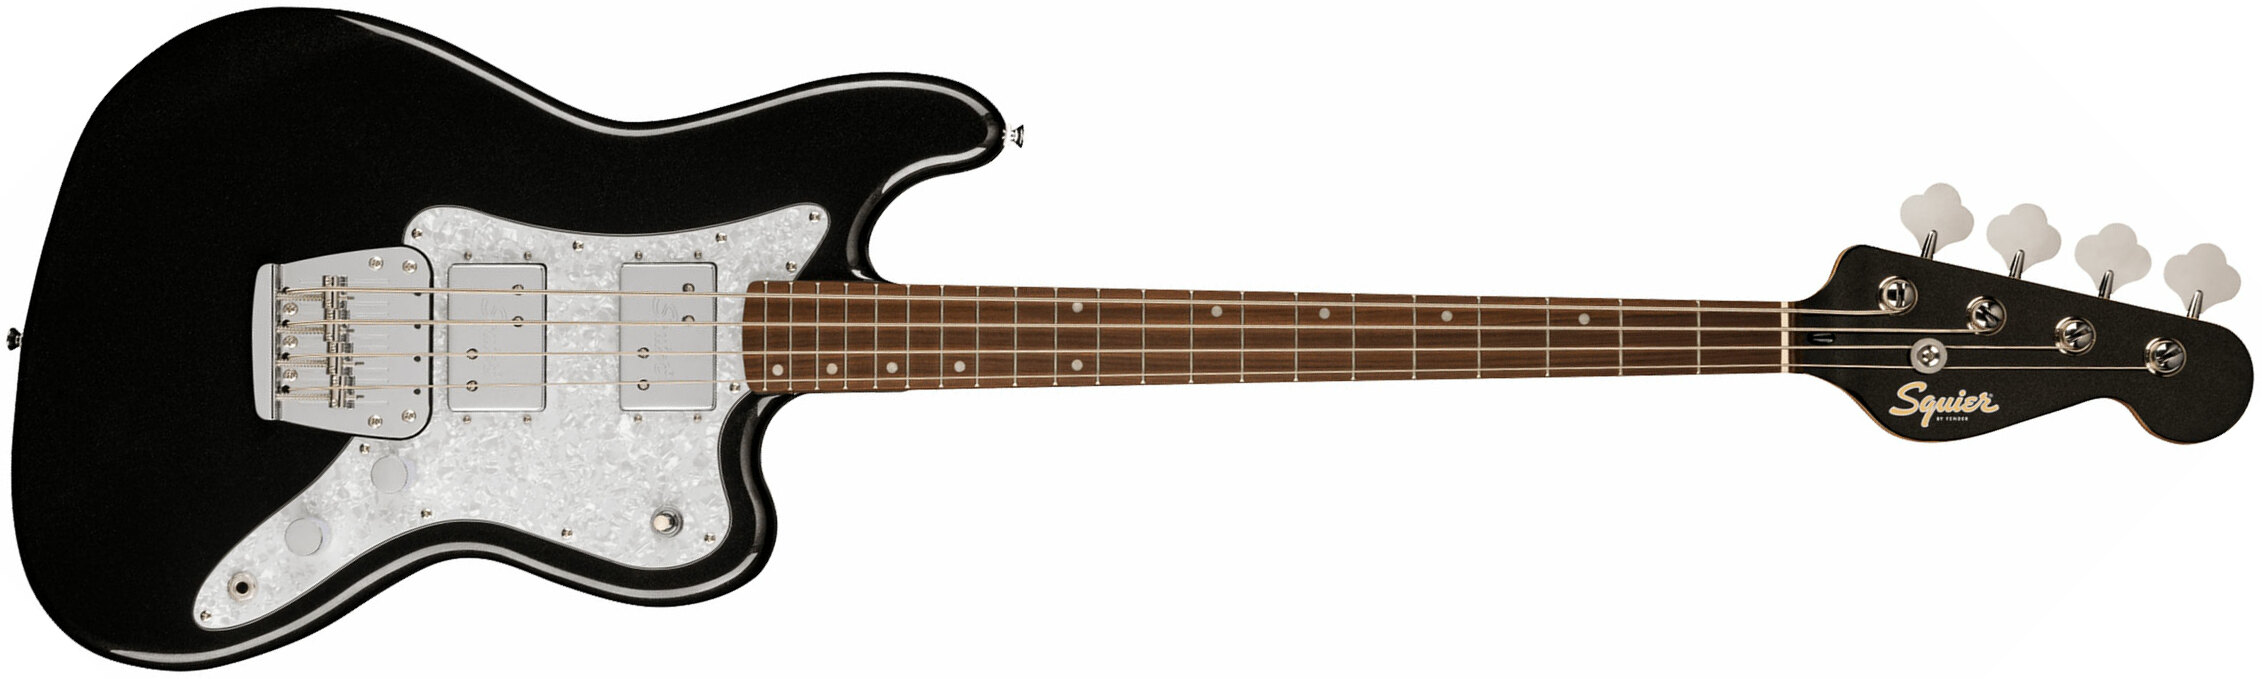 Squier Rascal Bass Hh Paranormal 2h Lau - Metallic Black - Solid body electric bass - Main picture